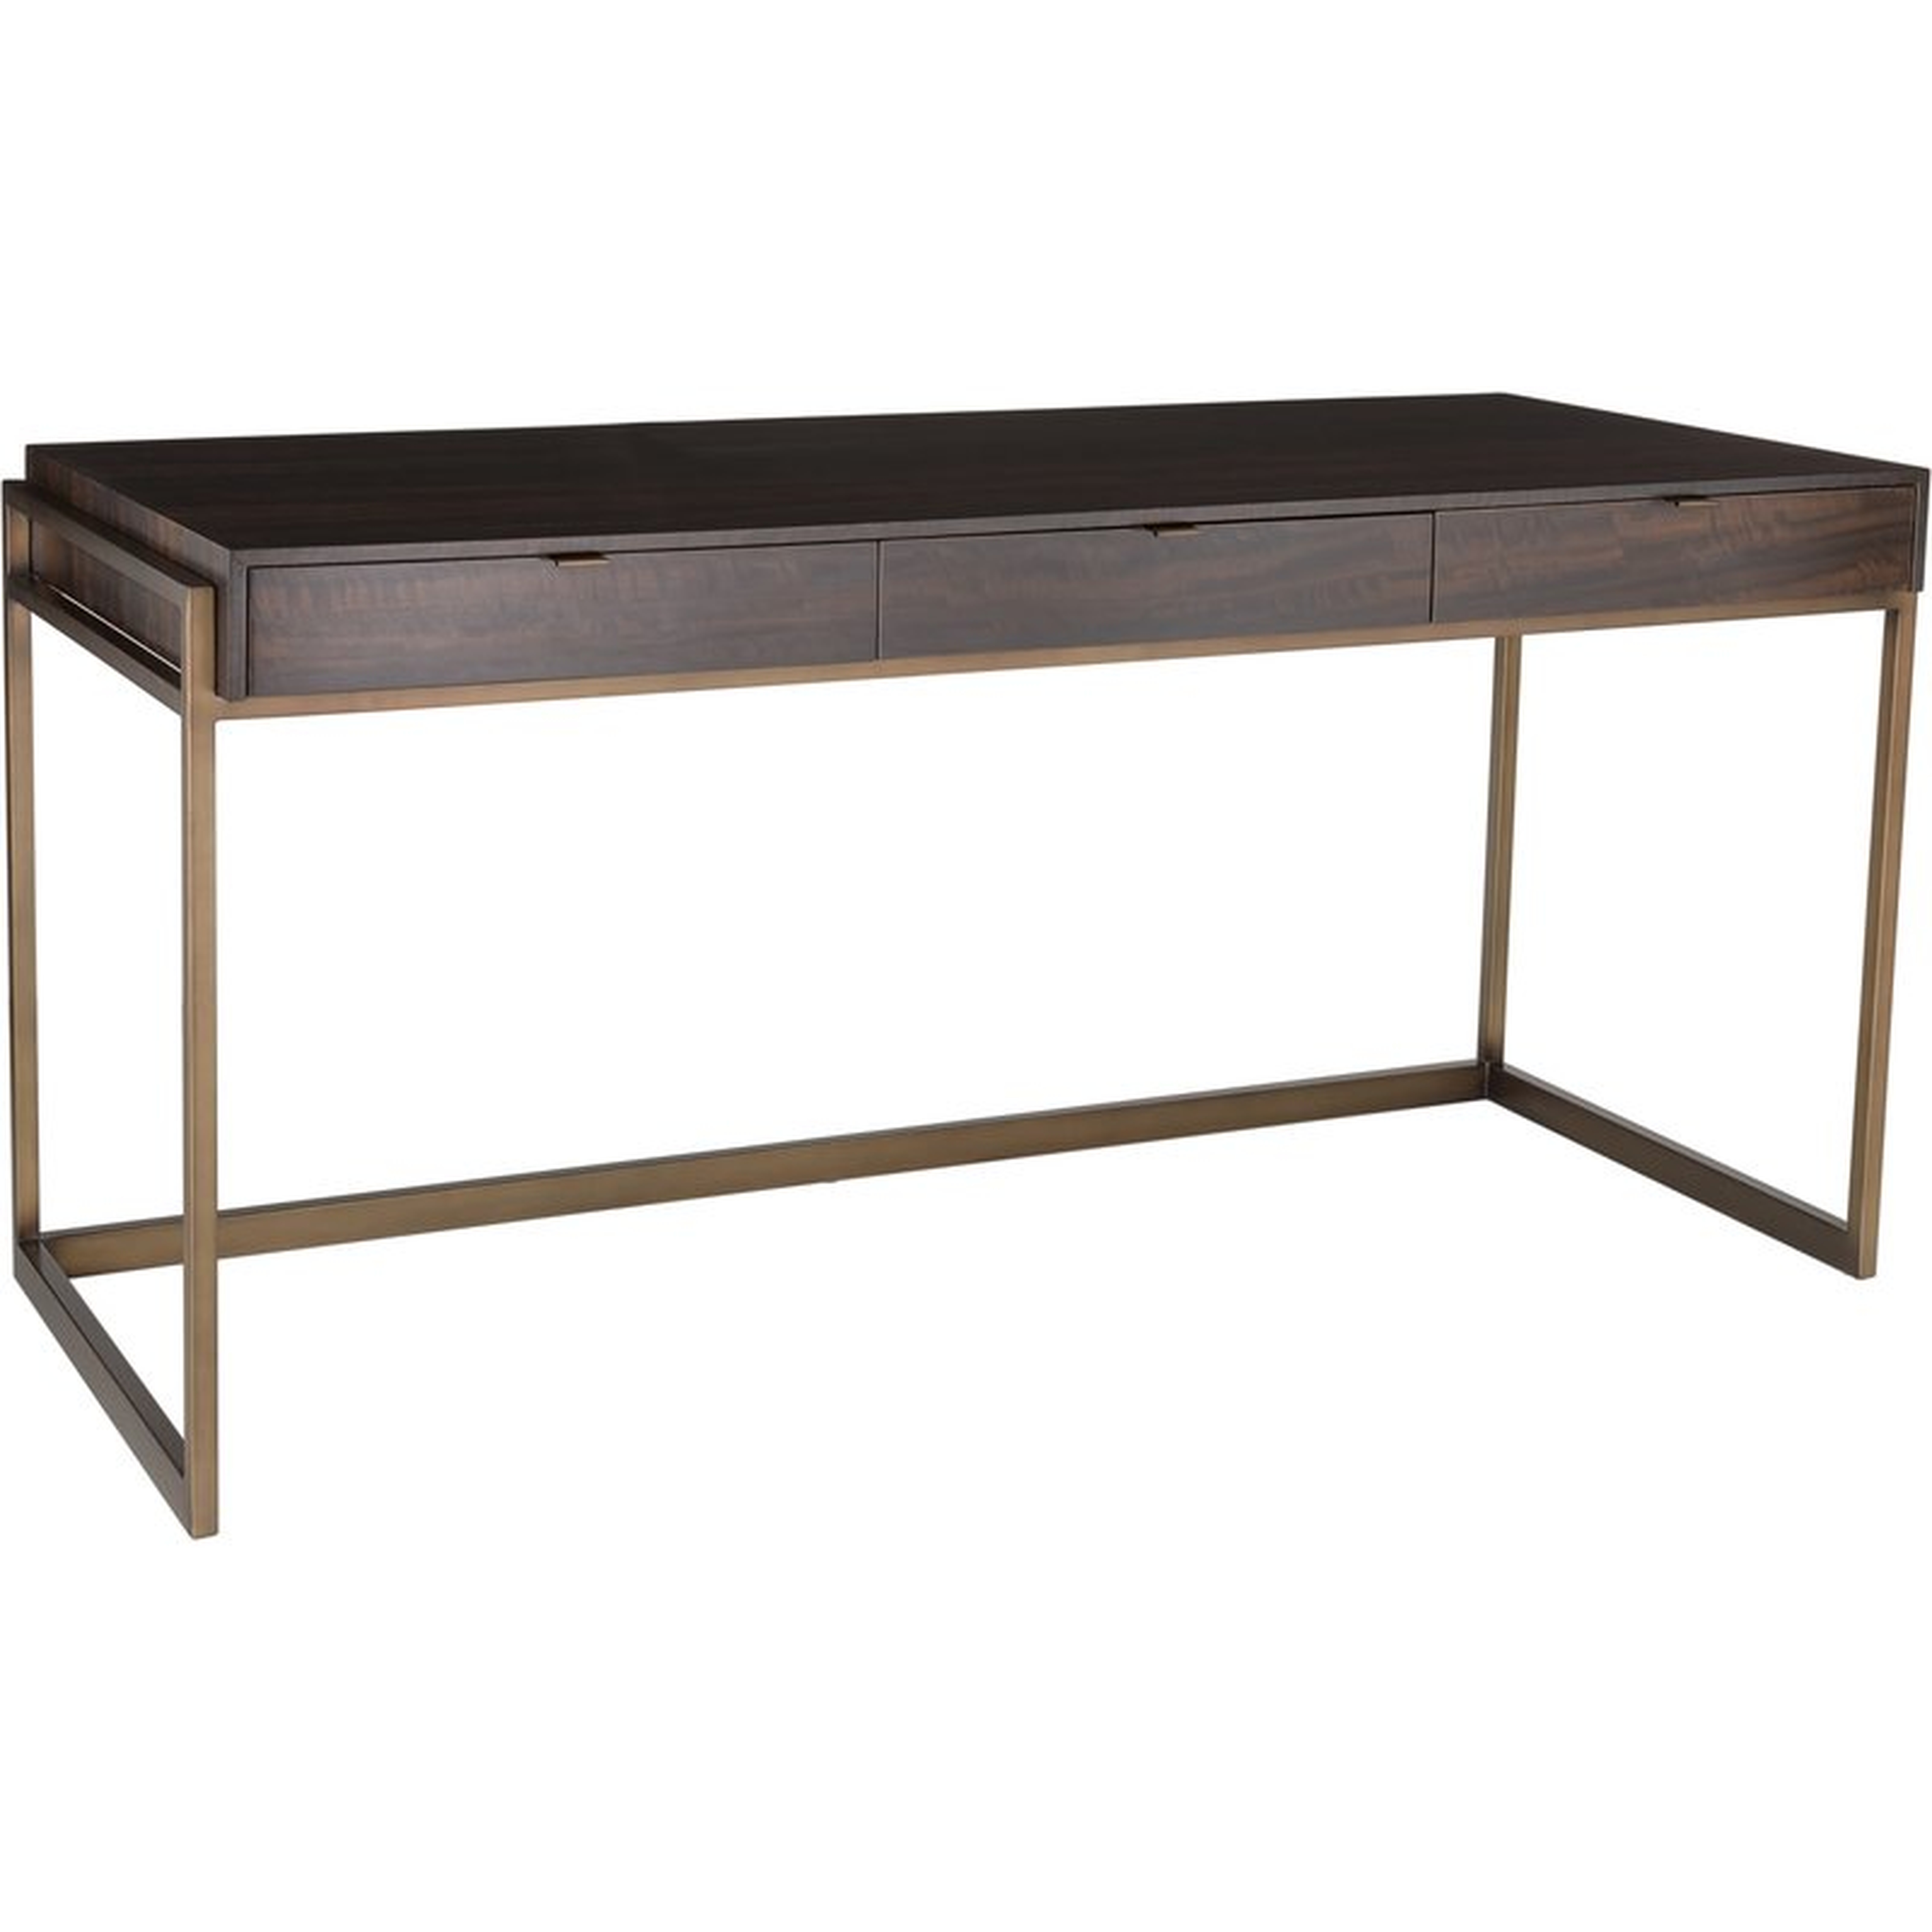 COUTURE GENEVIEVE 3 DRAWER REVERSIBLE SOLID WOOD DESK - Perigold